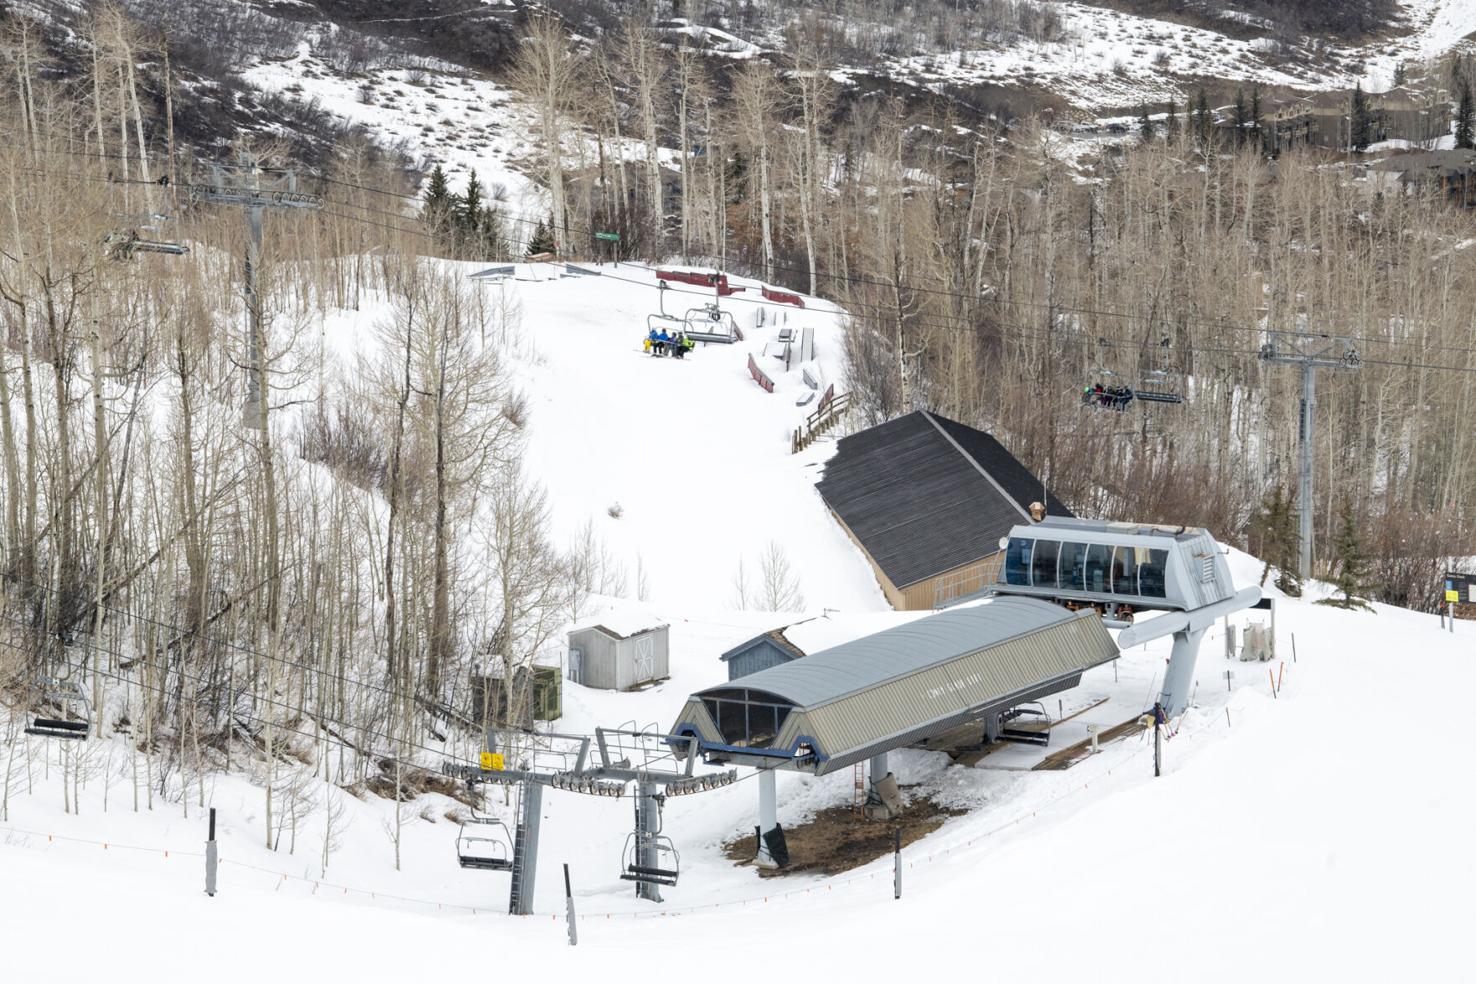 Coney Glade lift replacement on tap for summer | News | aspendailynews.com